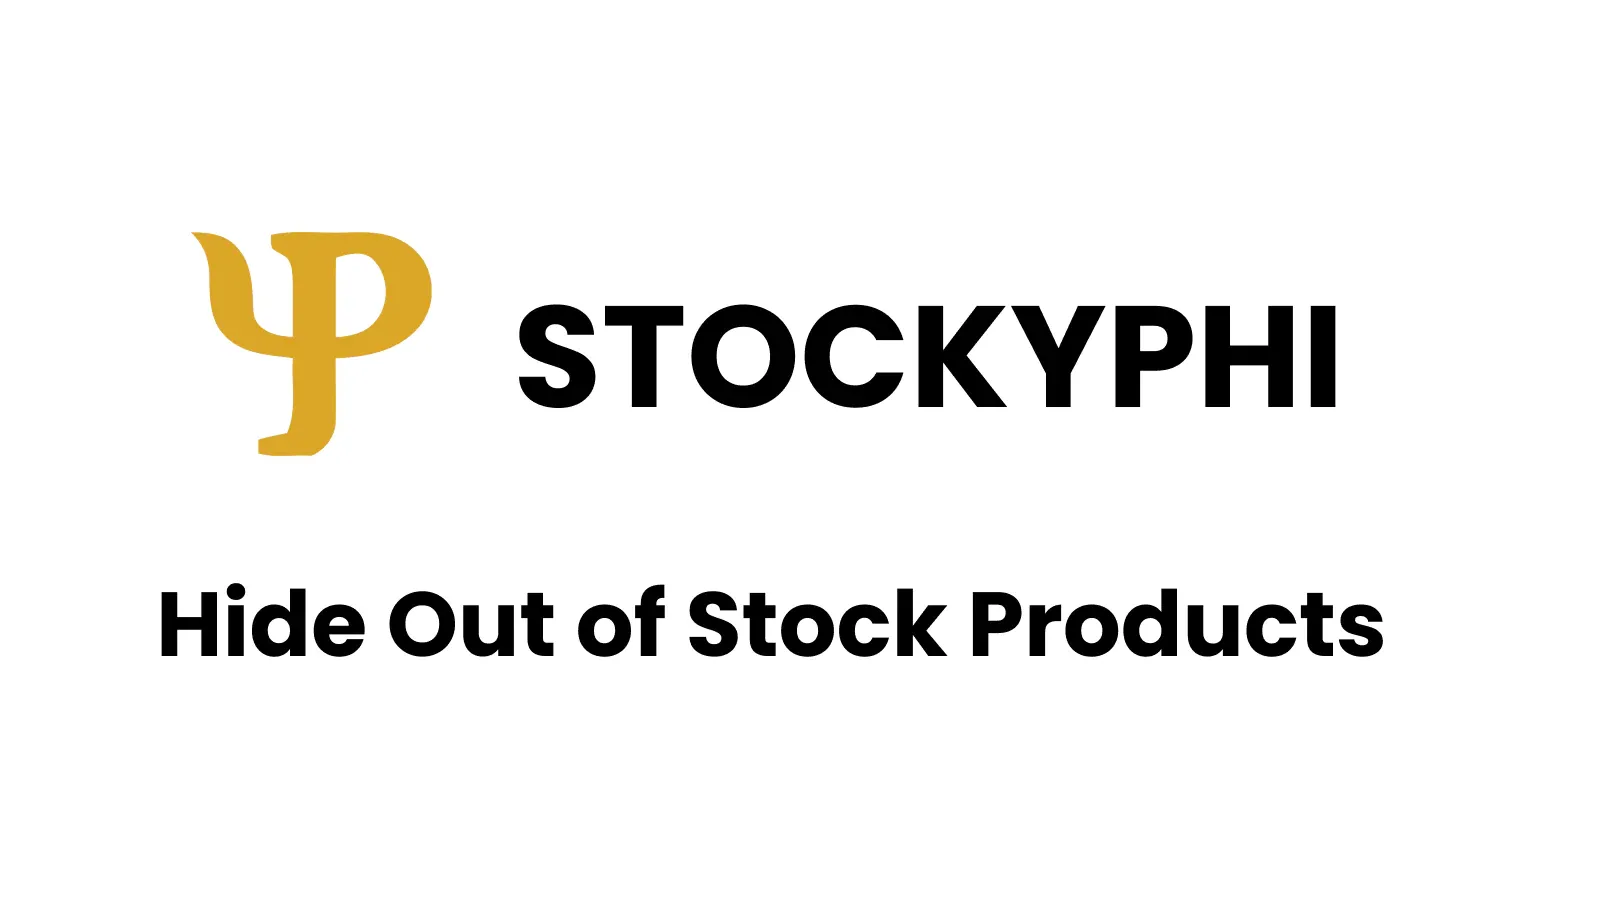 Stockyphi ‑ Hide Out Of Stock Products